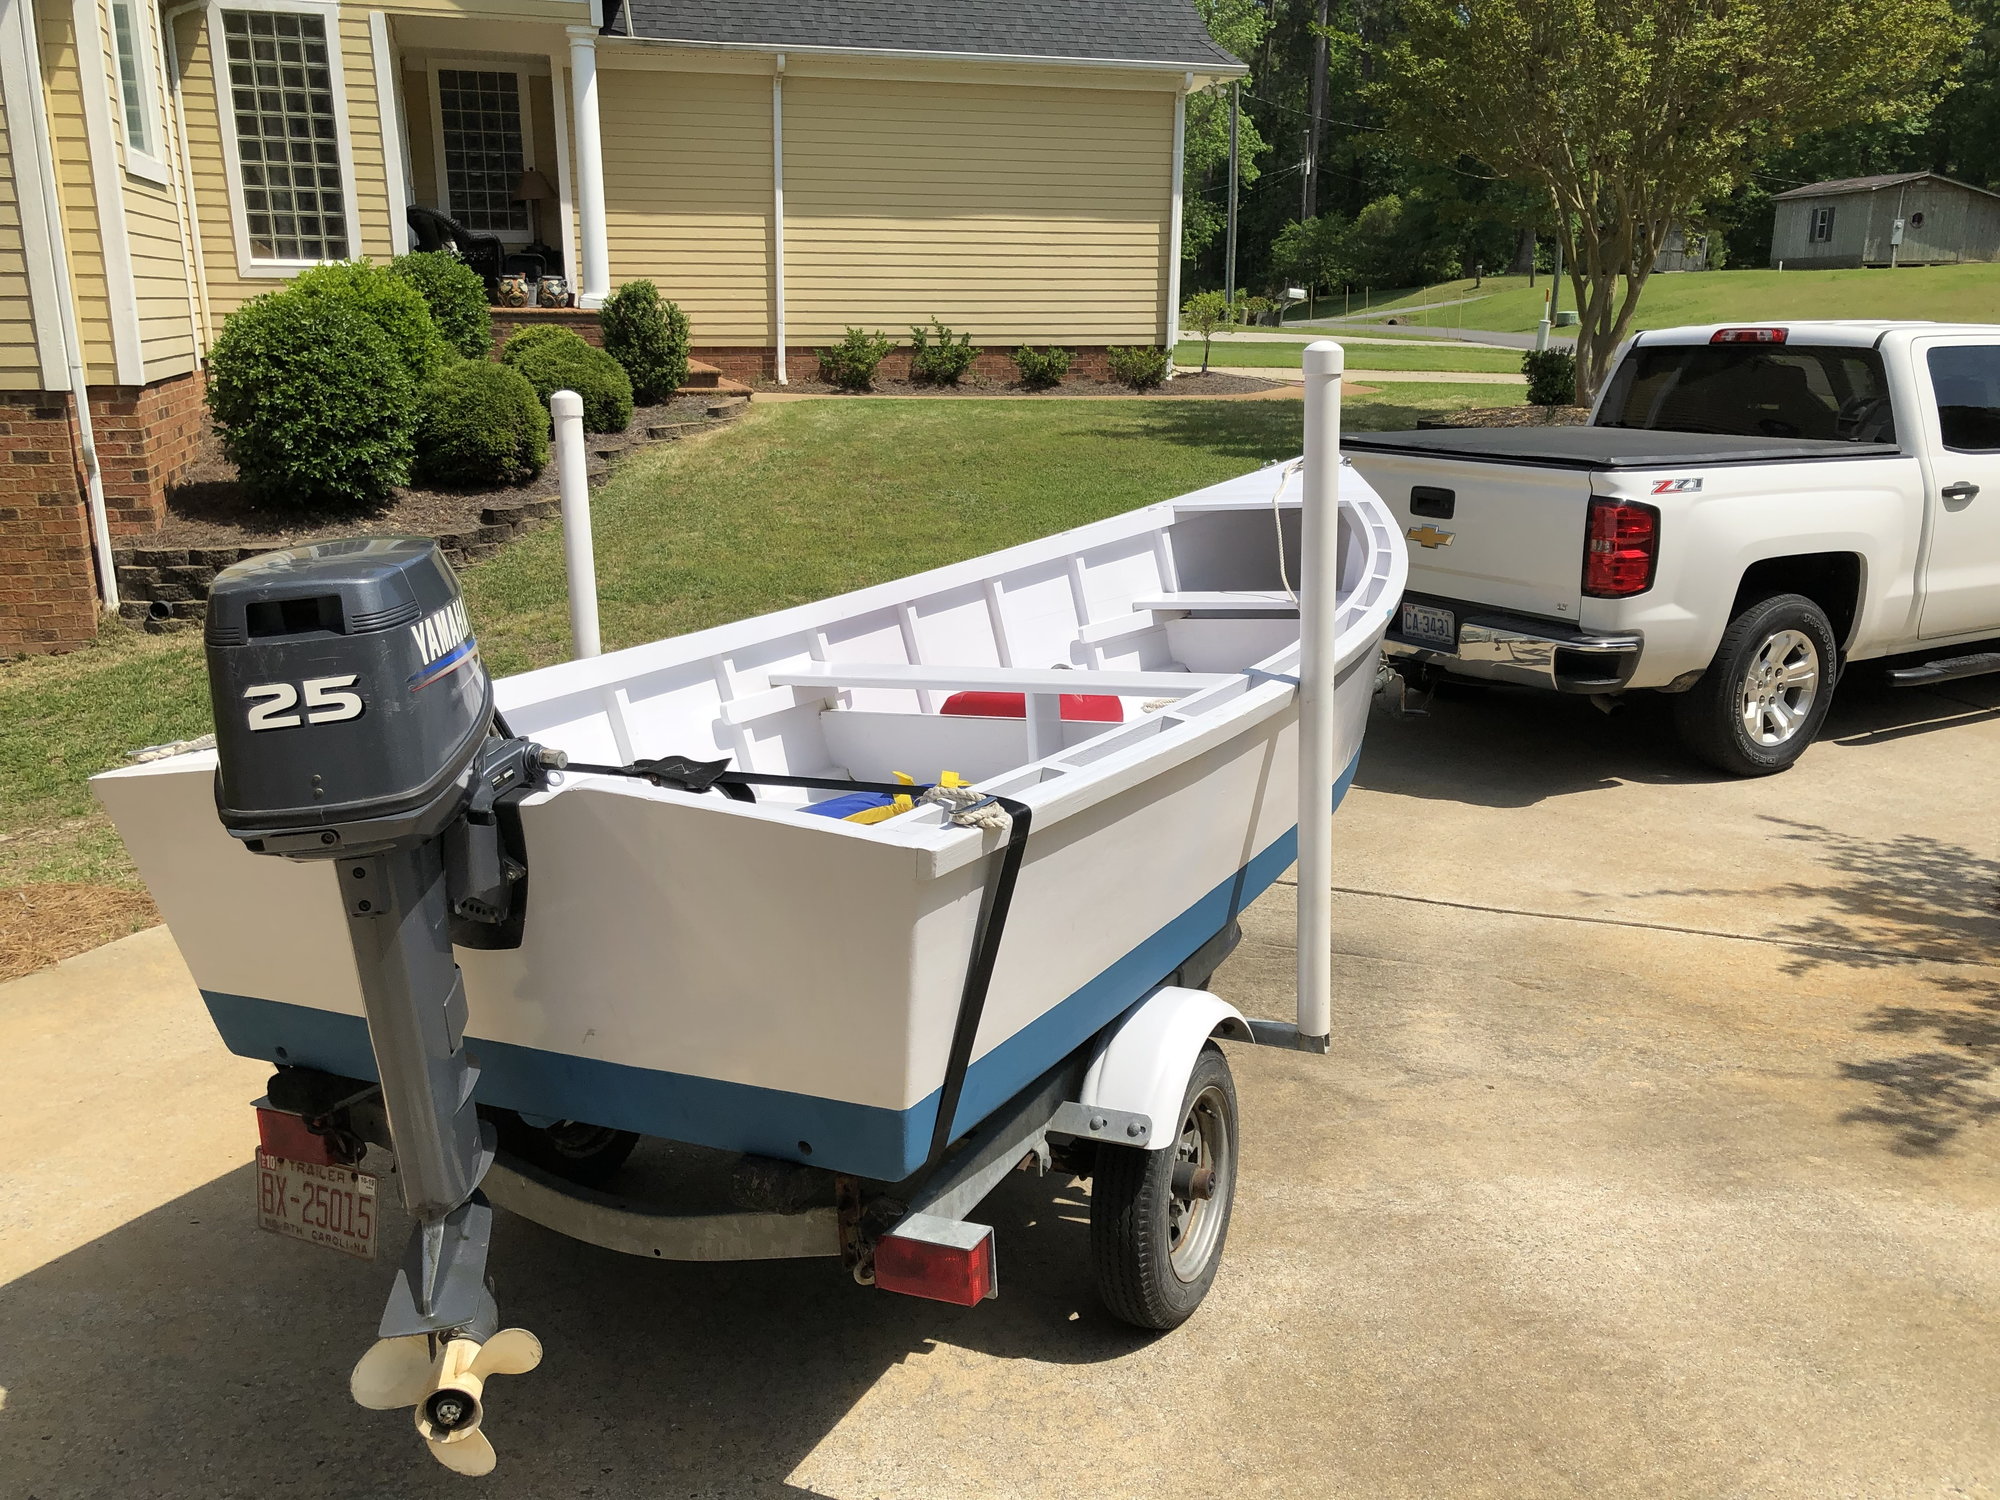 15 Harkers Island Skiff 6000 Sold The Hull Truth Boating And Fishing Forum